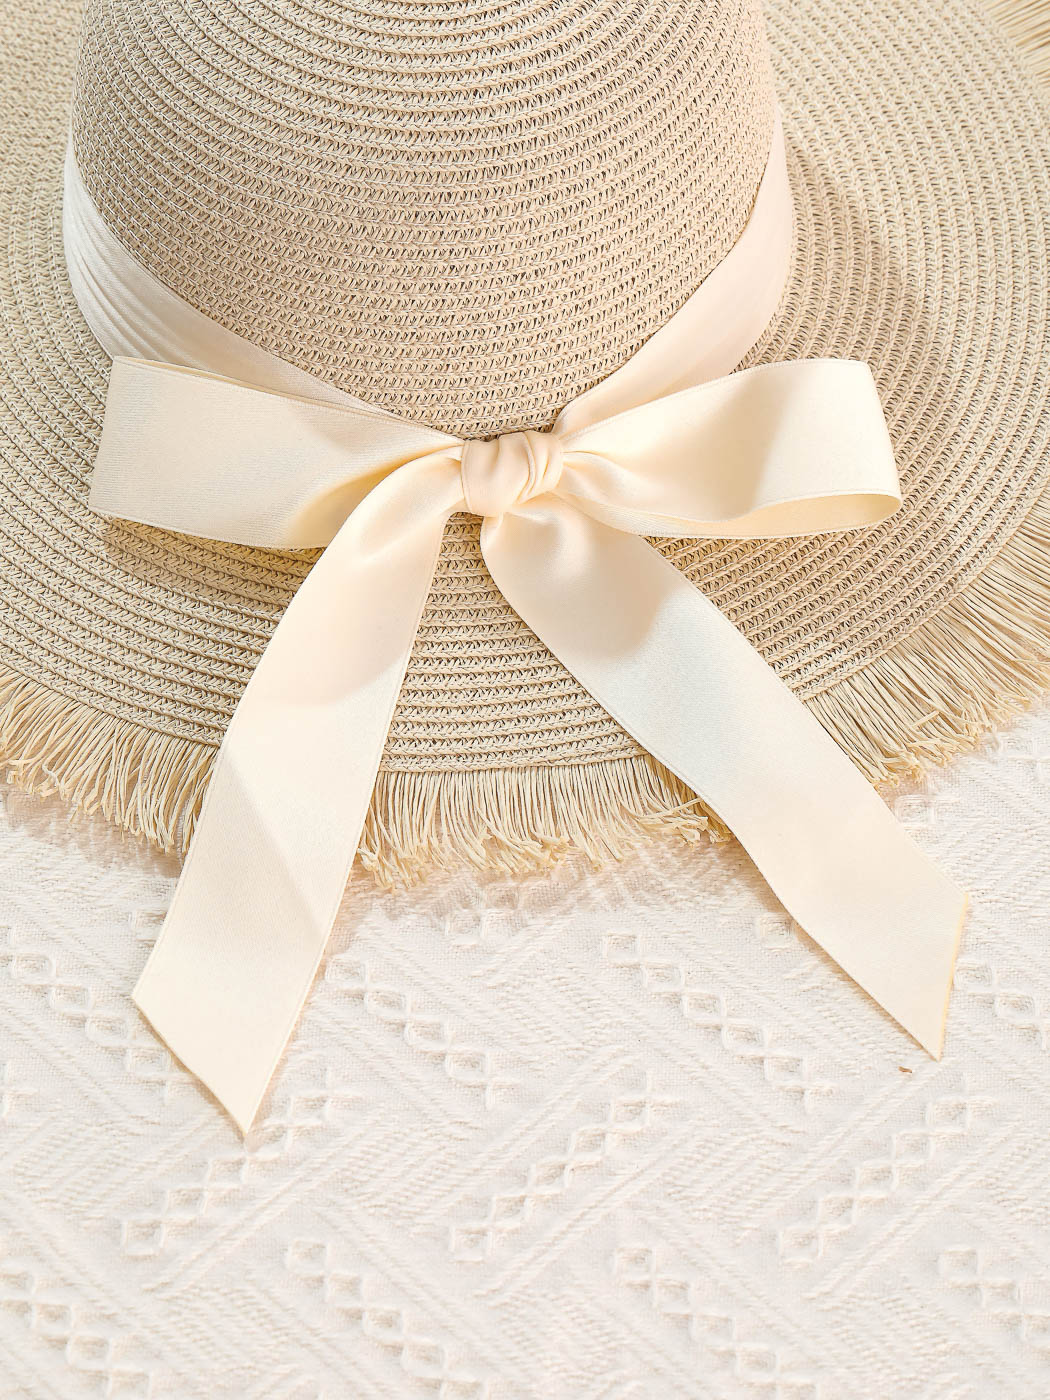 MINISO HAPPY VACATION STRAW HAT ( CREAMY WHITE ) 2010116710104 FASHIONABLE HAT